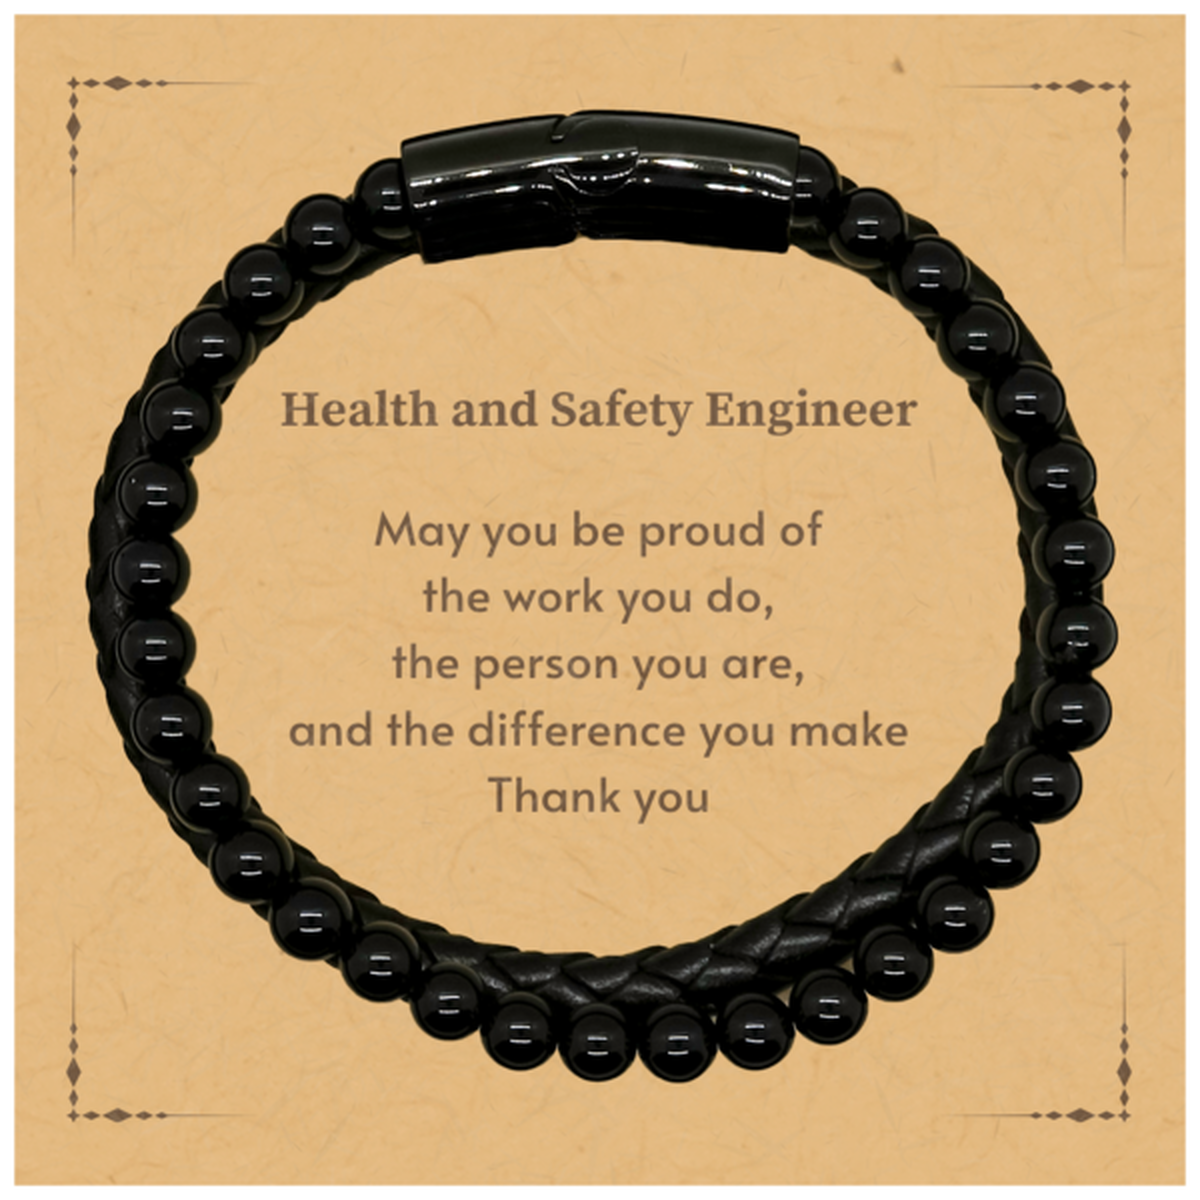 Heartwarming Stone Leather Bracelets Retirement Coworkers Gifts for Health and Safety Engineer, Health and Safety Engineer May You be proud of the work you do, the person you are Gifts for Boss Men Women Friends